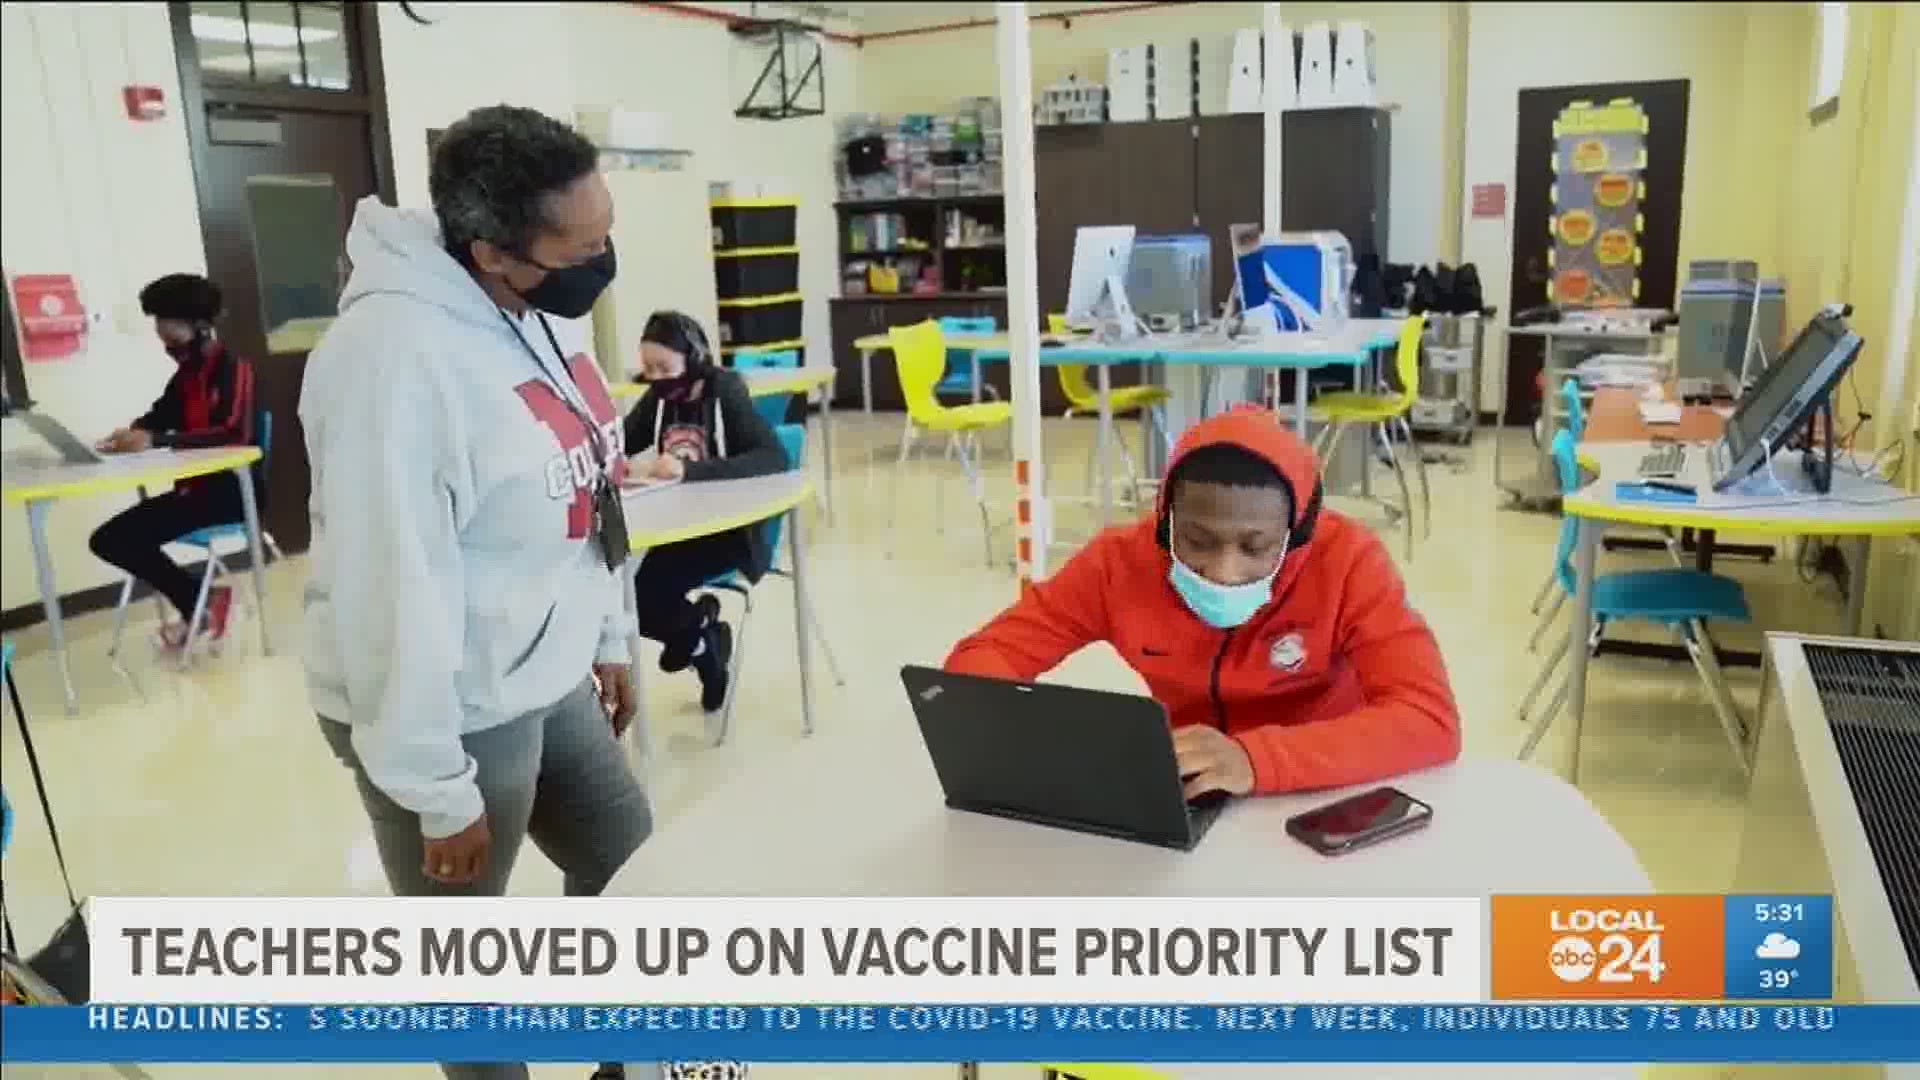 The Memphis-Shelby County Education Association is preparing for when educators and staff can get vaccinated